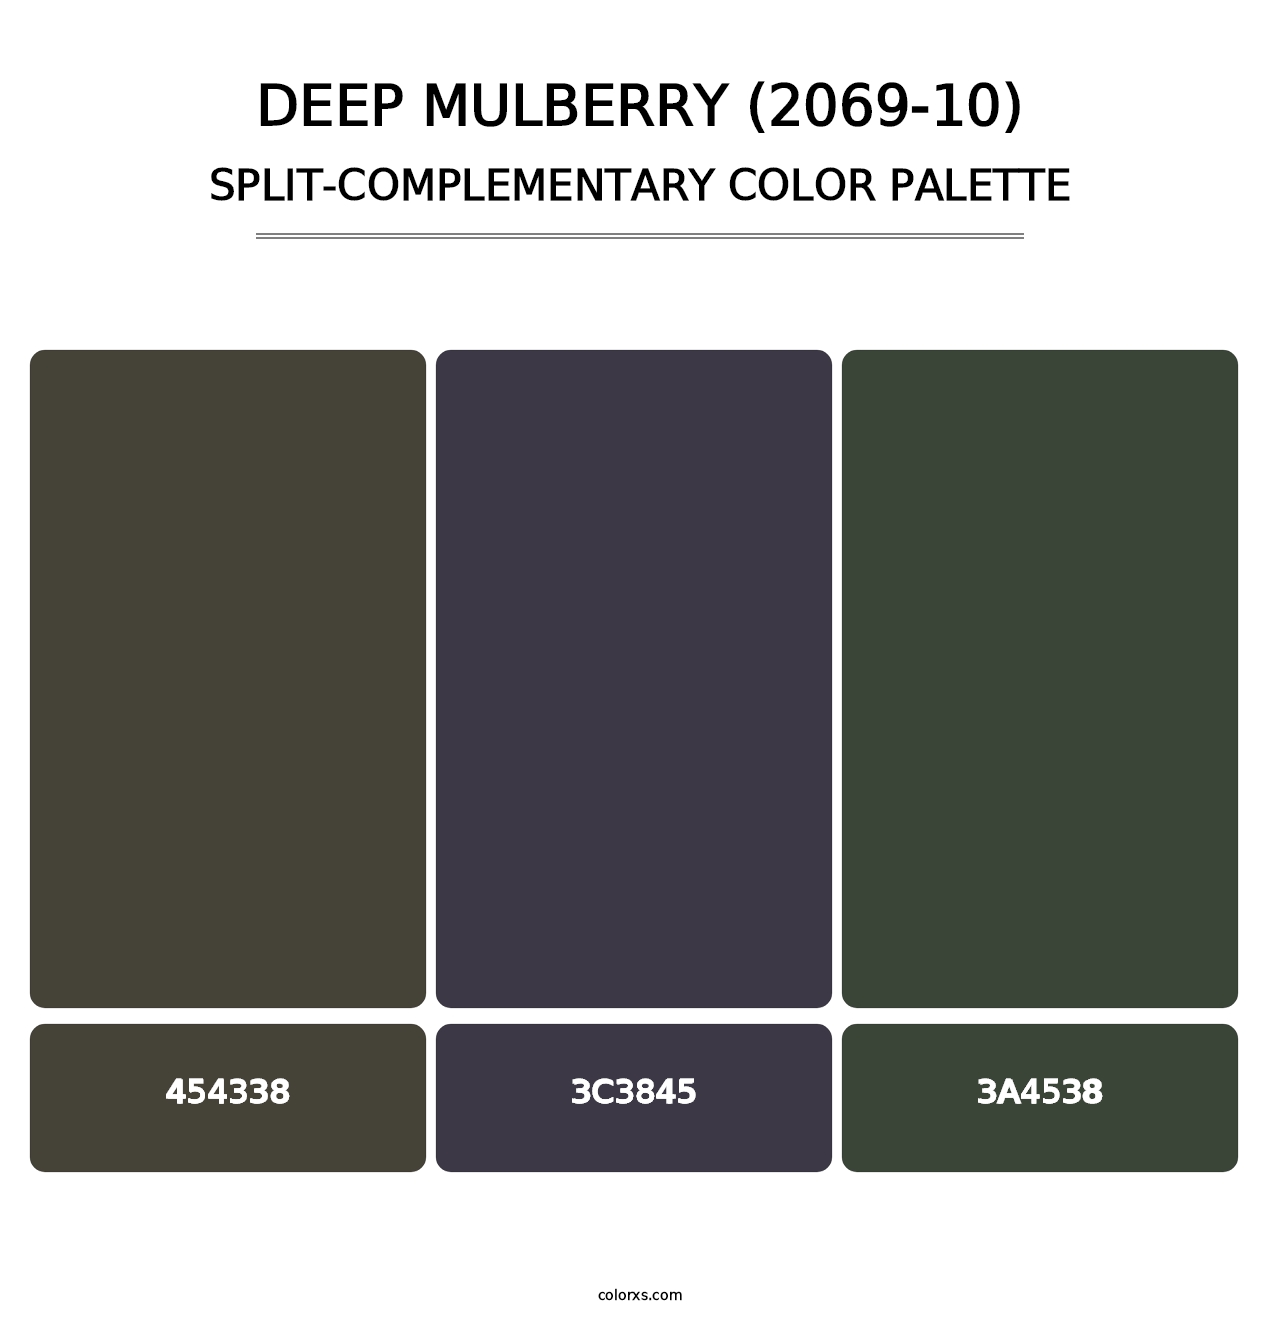 Deep Mulberry (2069-10) - Split-Complementary Color Palette